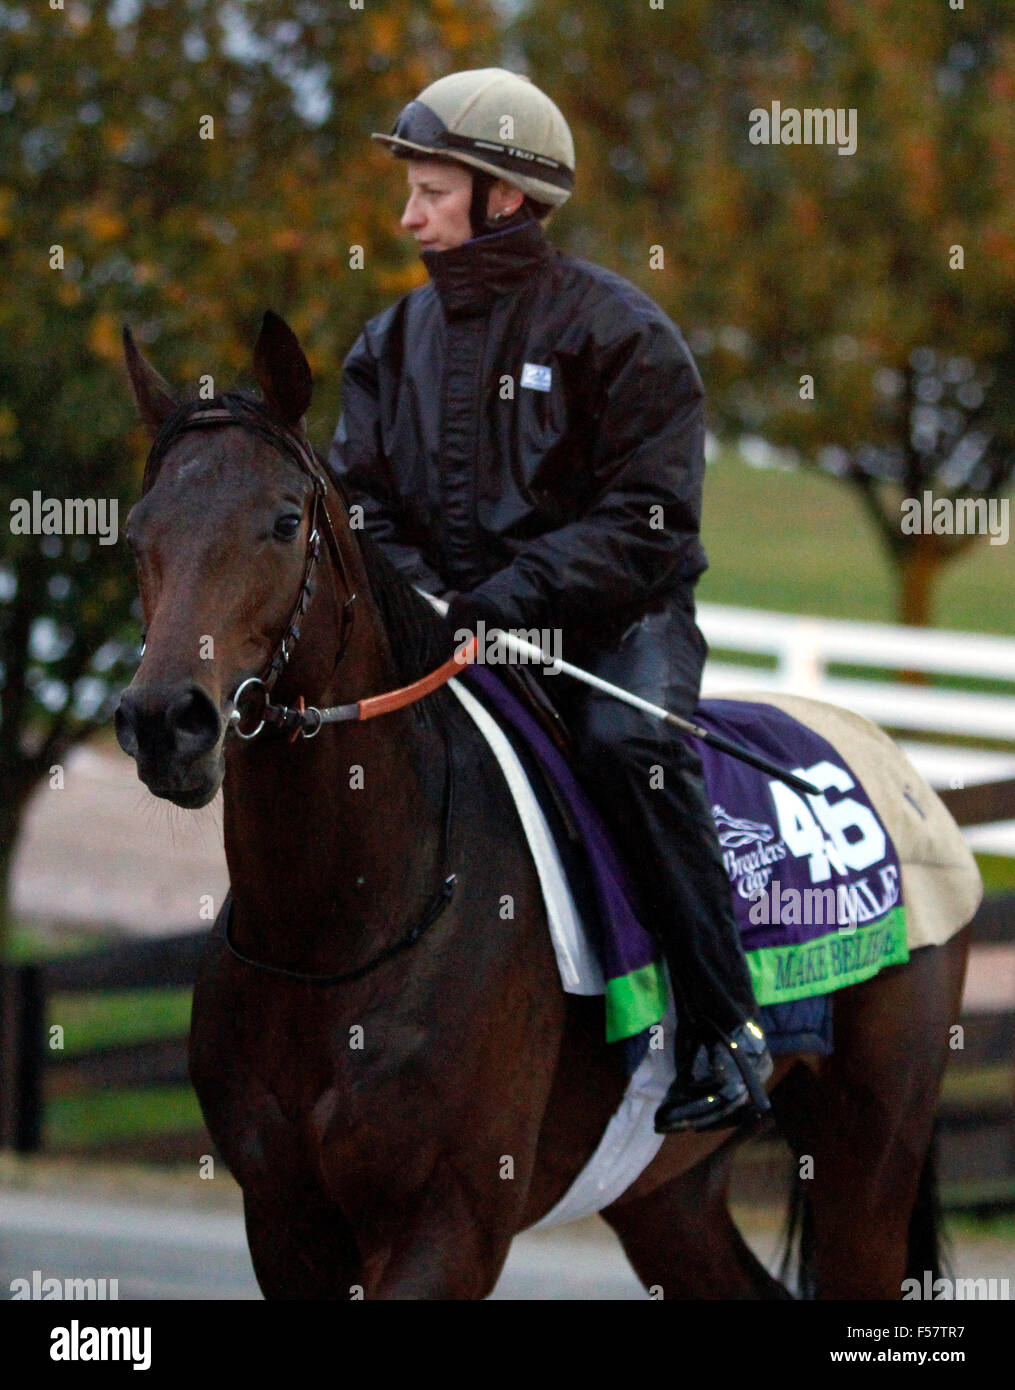 Lexington, KY, USA. 28th Oct, 2015. October 28, 2015: Make Believe (GB), trained by Andre Fabre, and owned by Prince A.A. Faisal, is entered in the Breeder's Cup Mile. Candice Chavez/ESW/CSM/Alamy Live News Stock Photo